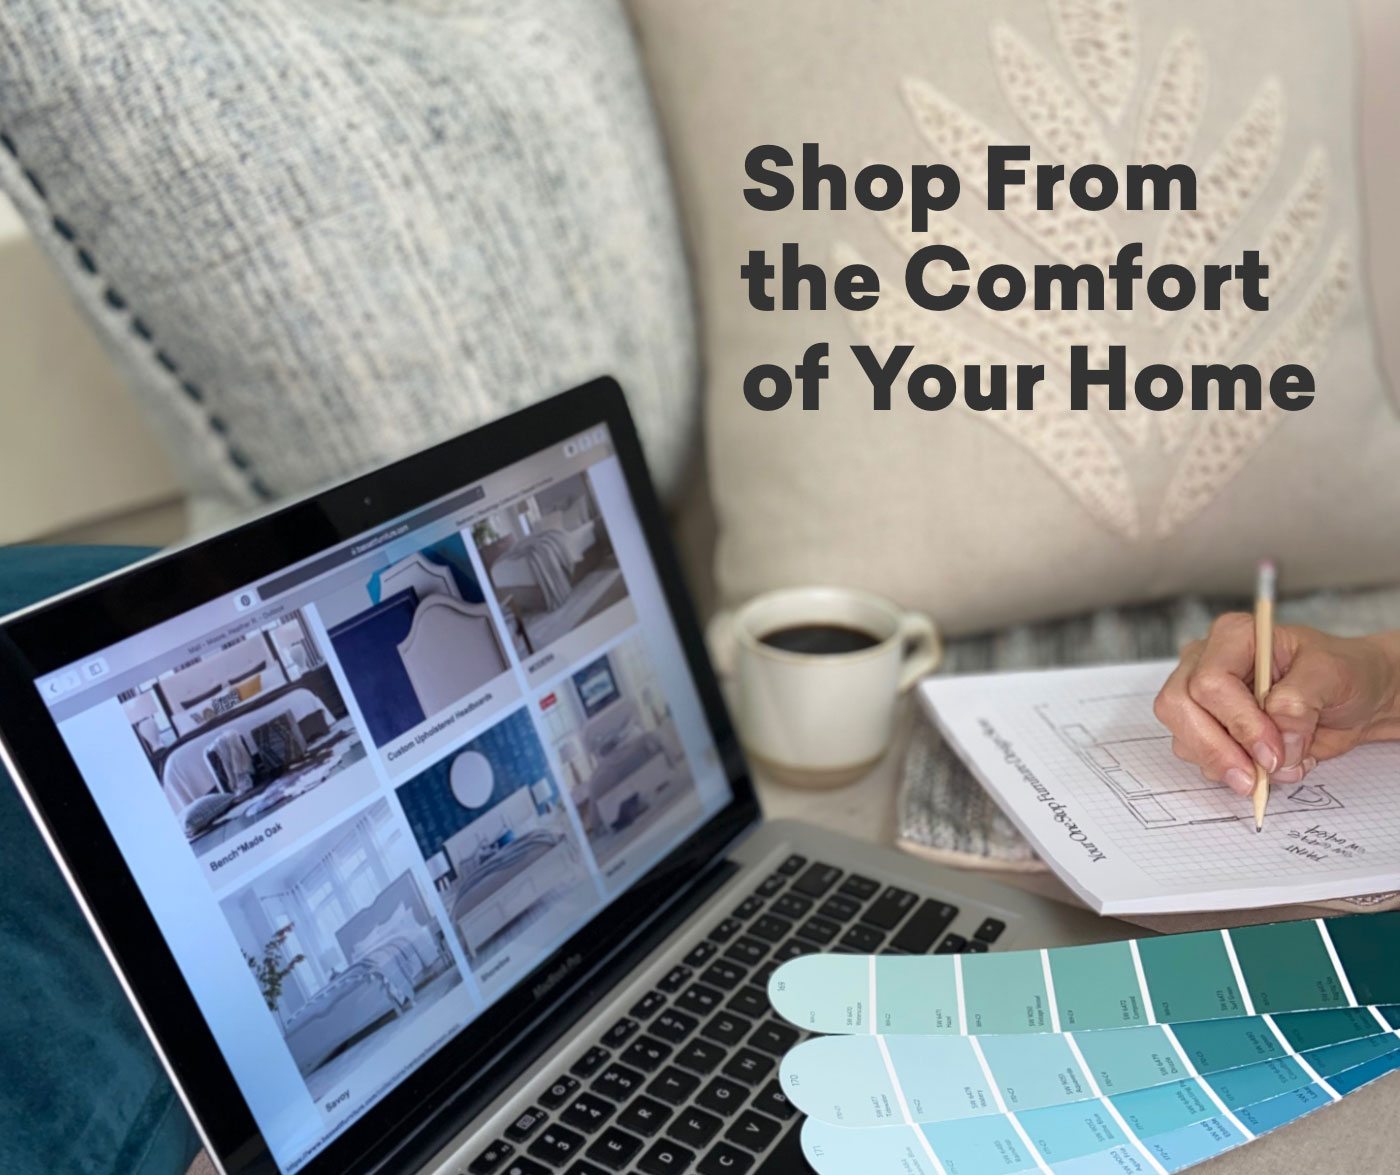 Shop from the comfort of your home.